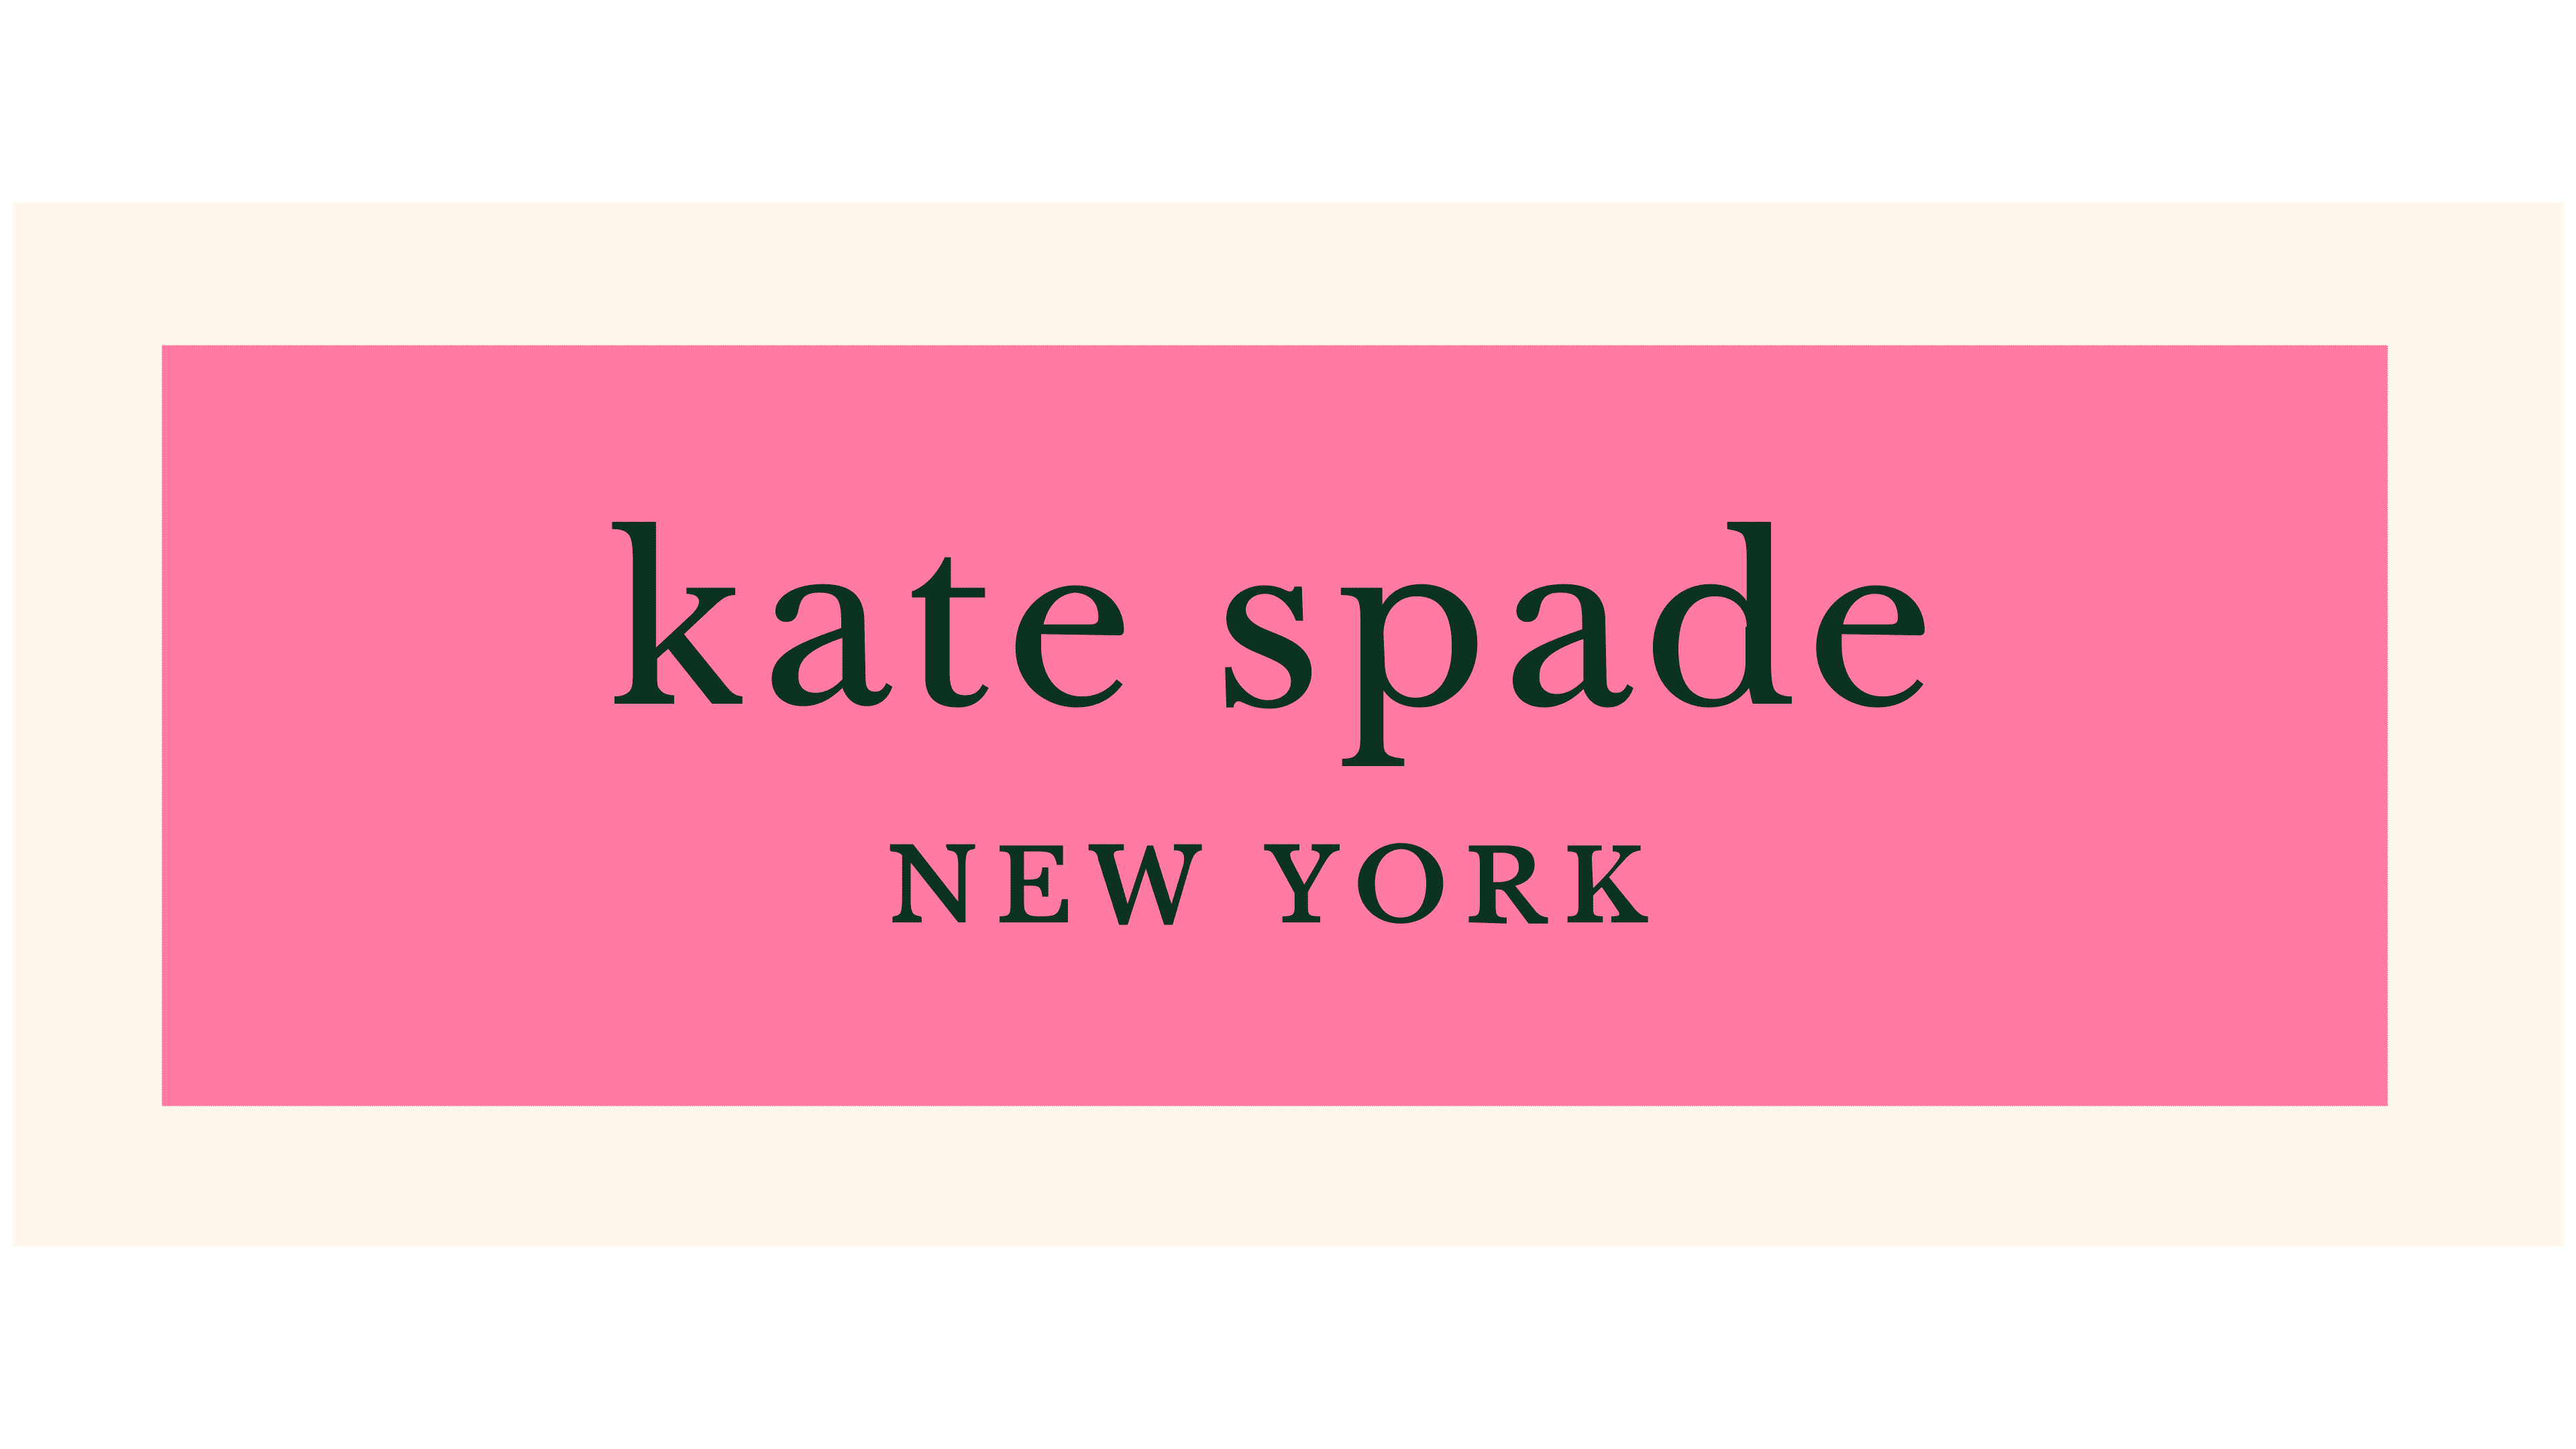 There's a New Kate Spade New York Logo and Design